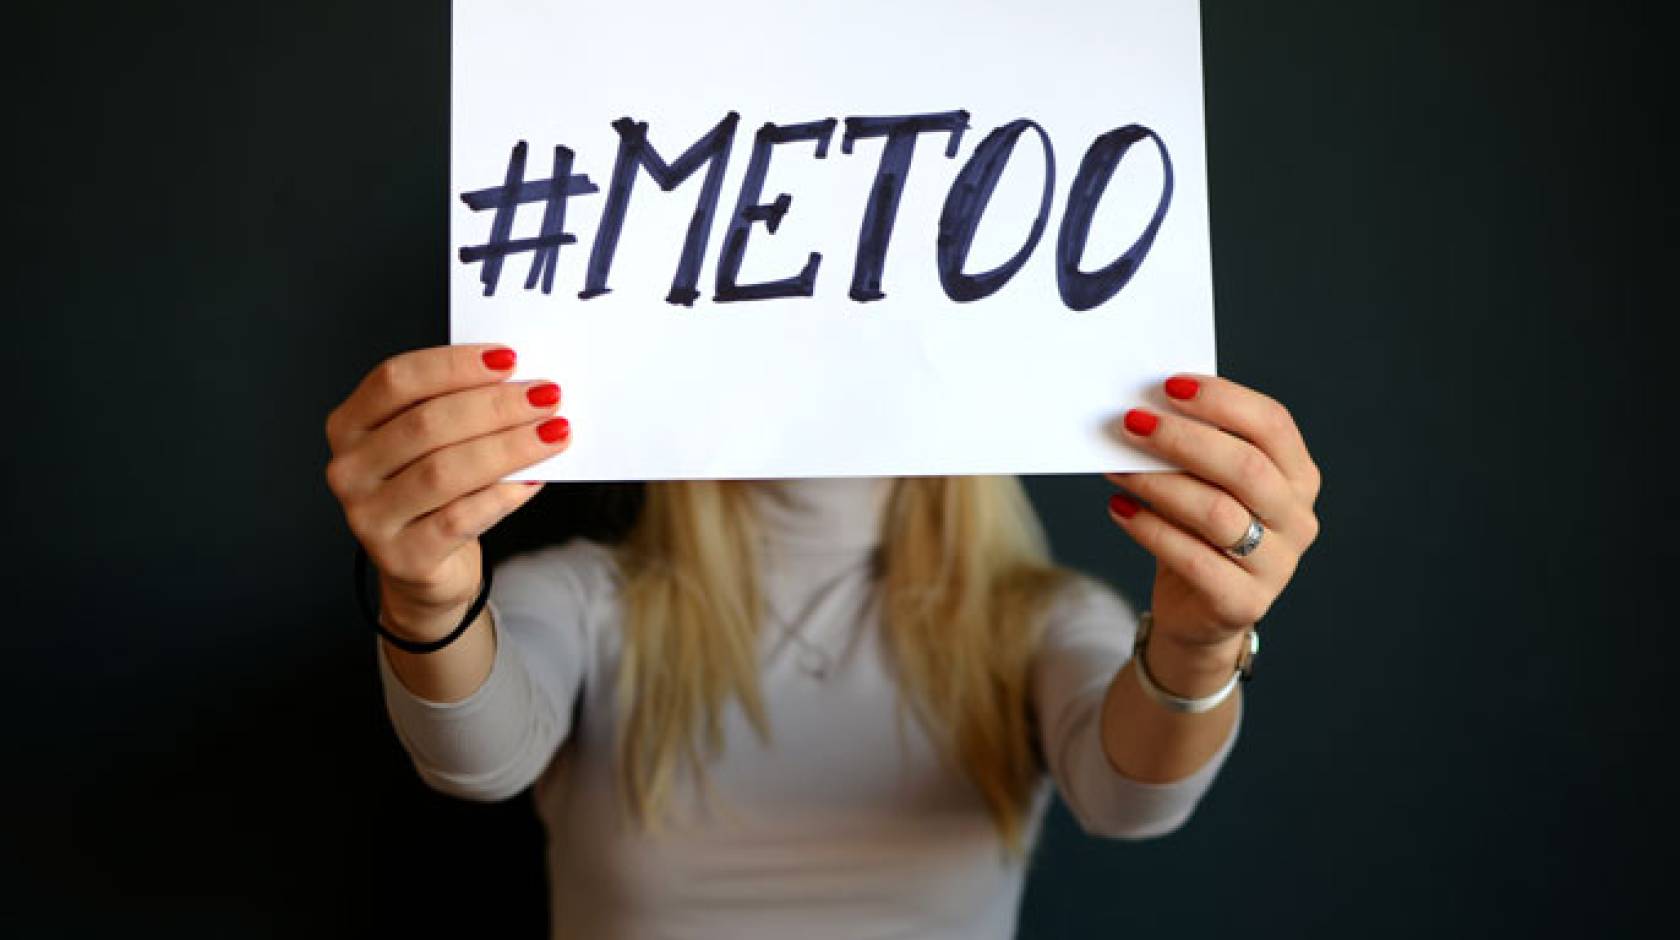 Hands holding up a #MeToo sign